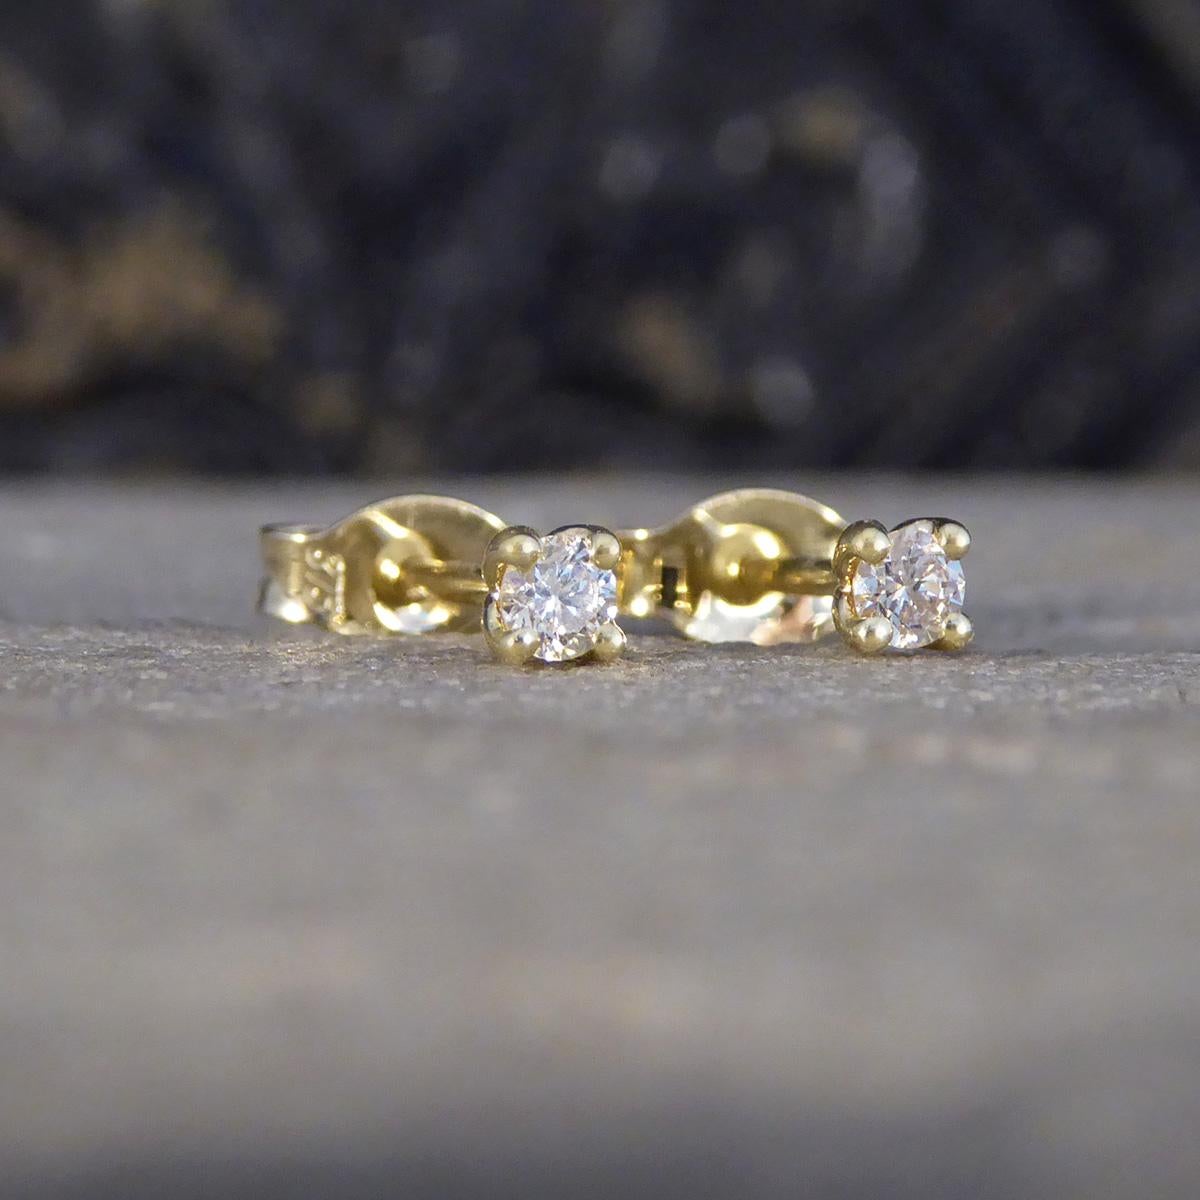 The perfect pair of stud earrings for everyday wear in the earlobe, and ideal for a second piercing. Each stud is set with a Round Brilliant Cut Diamond, matching well in colour and clarity and weighing a total of 0.10ct. Each Diamond sits in a 9ct